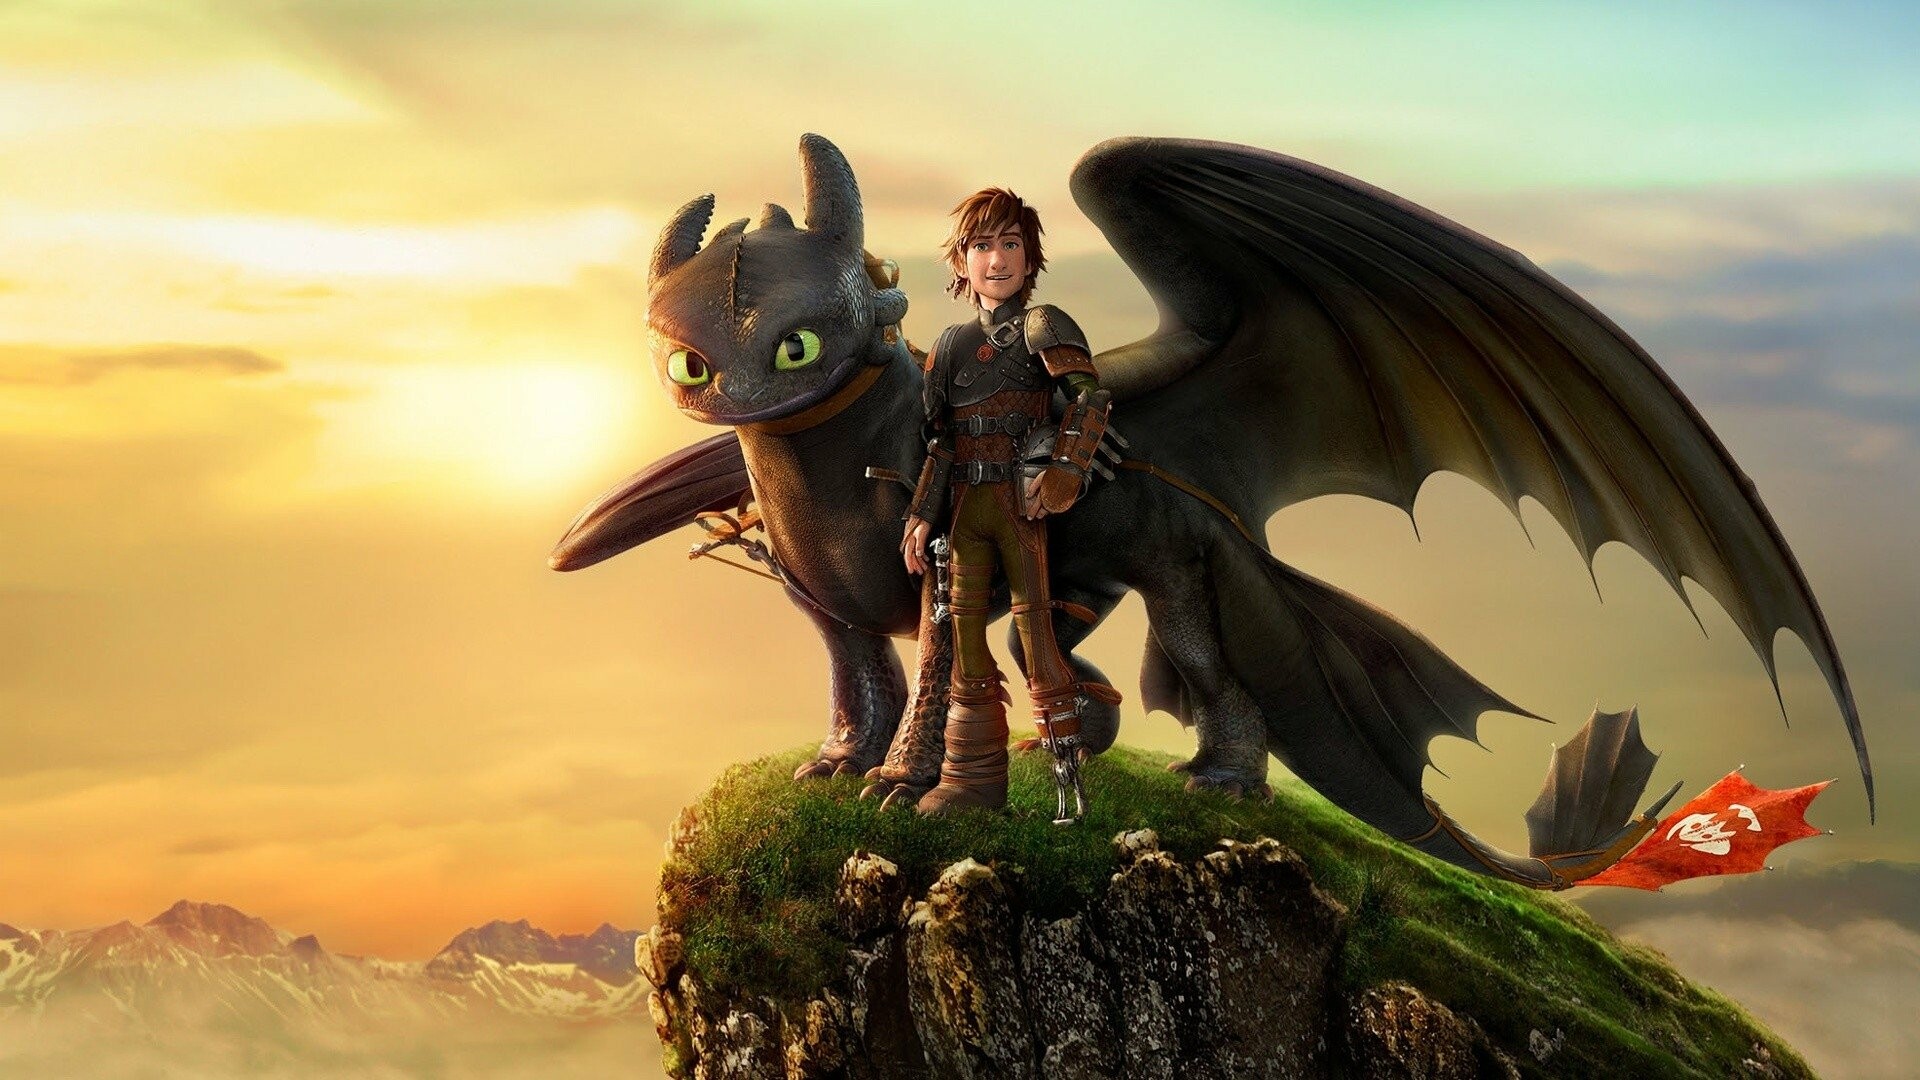 How to Train Your Dragon: A book series by Cressida Cowell, which Dreamworks later adapted into a franchise with films, shows, video games. 1920x1080 Full HD Wallpaper.